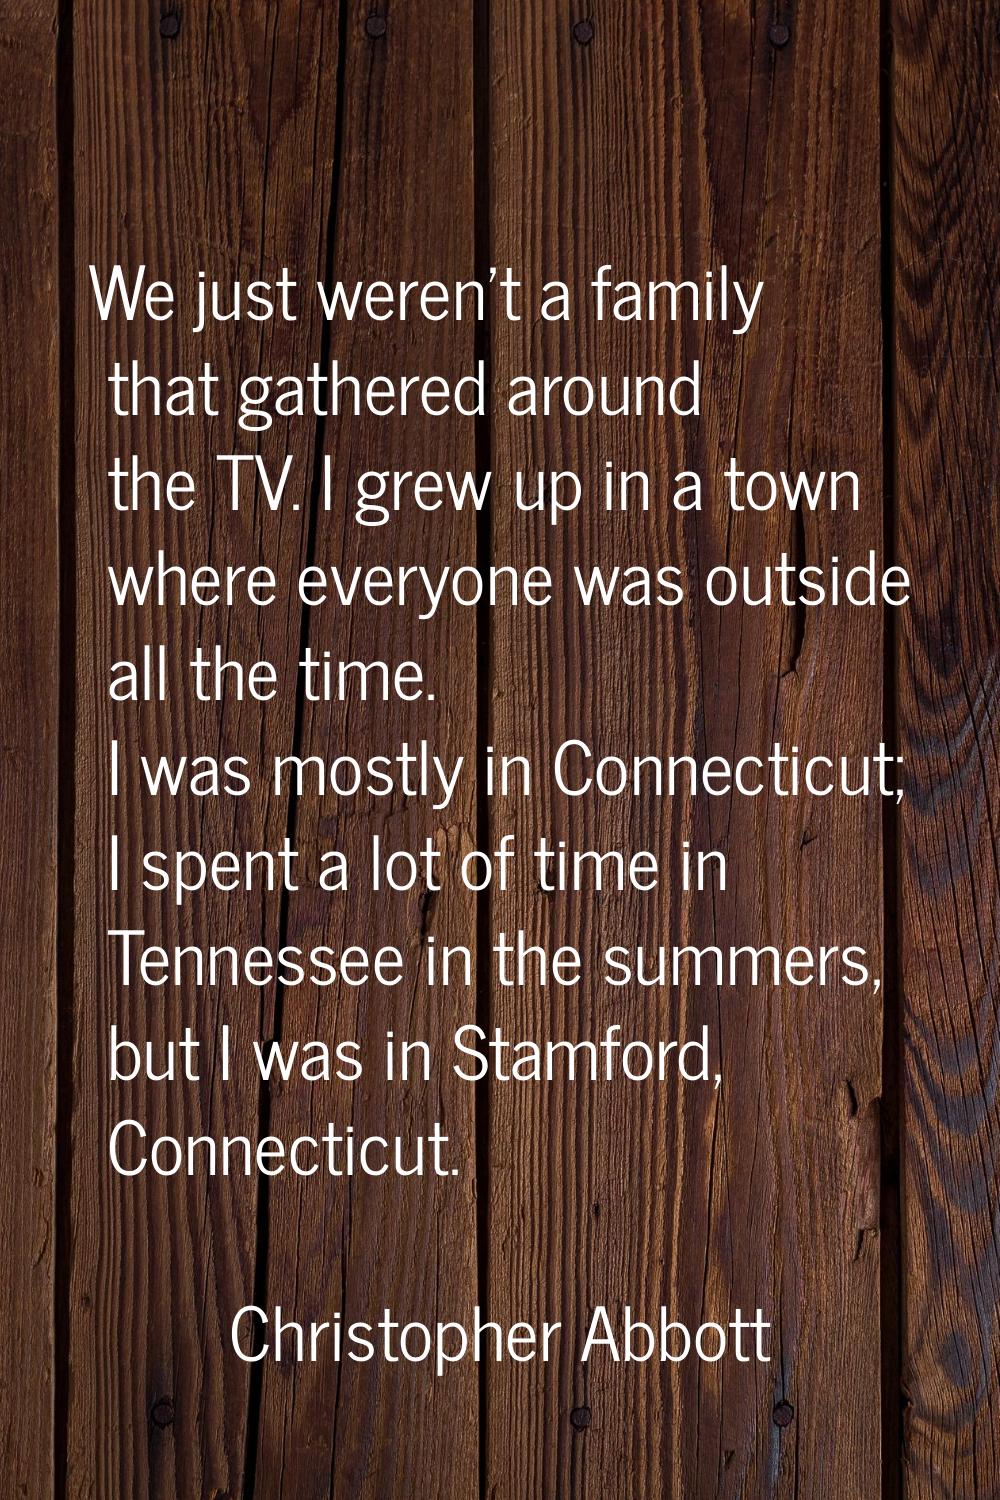 We just weren't a family that gathered around the TV. I grew up in a town where everyone was outsid